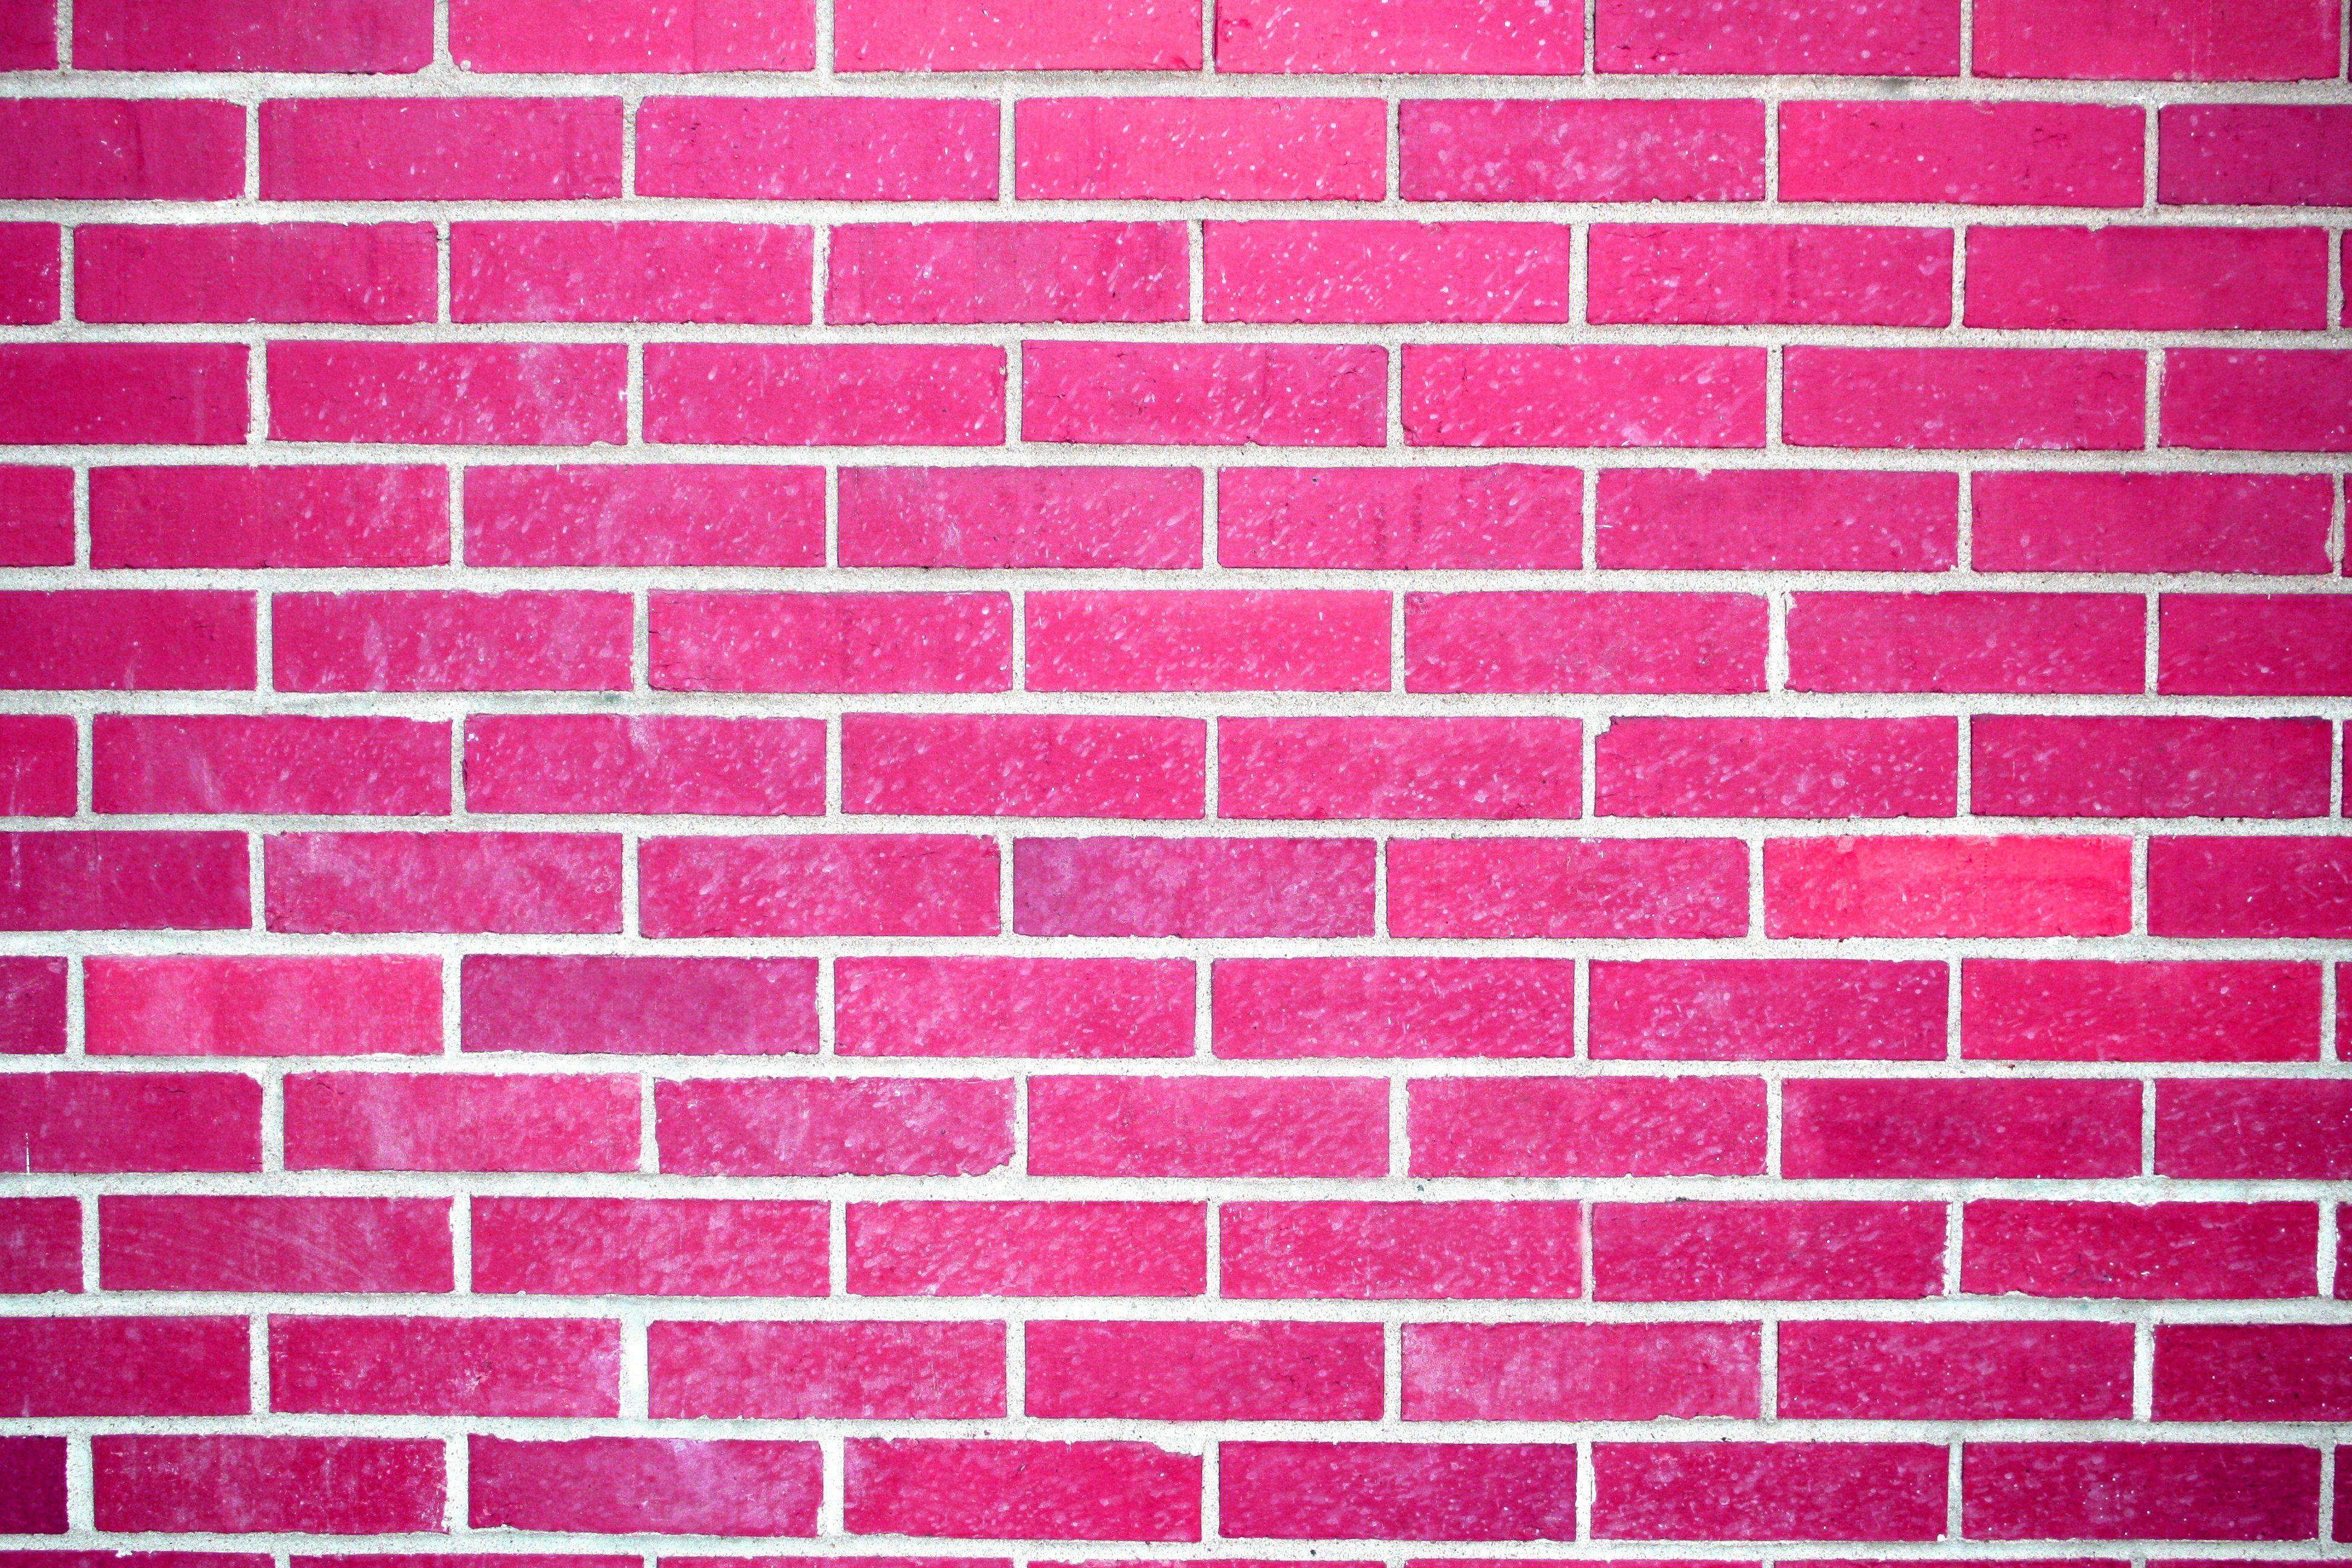 Hot Pink Brick Wall Texture Picture. Free Photograph. Photo